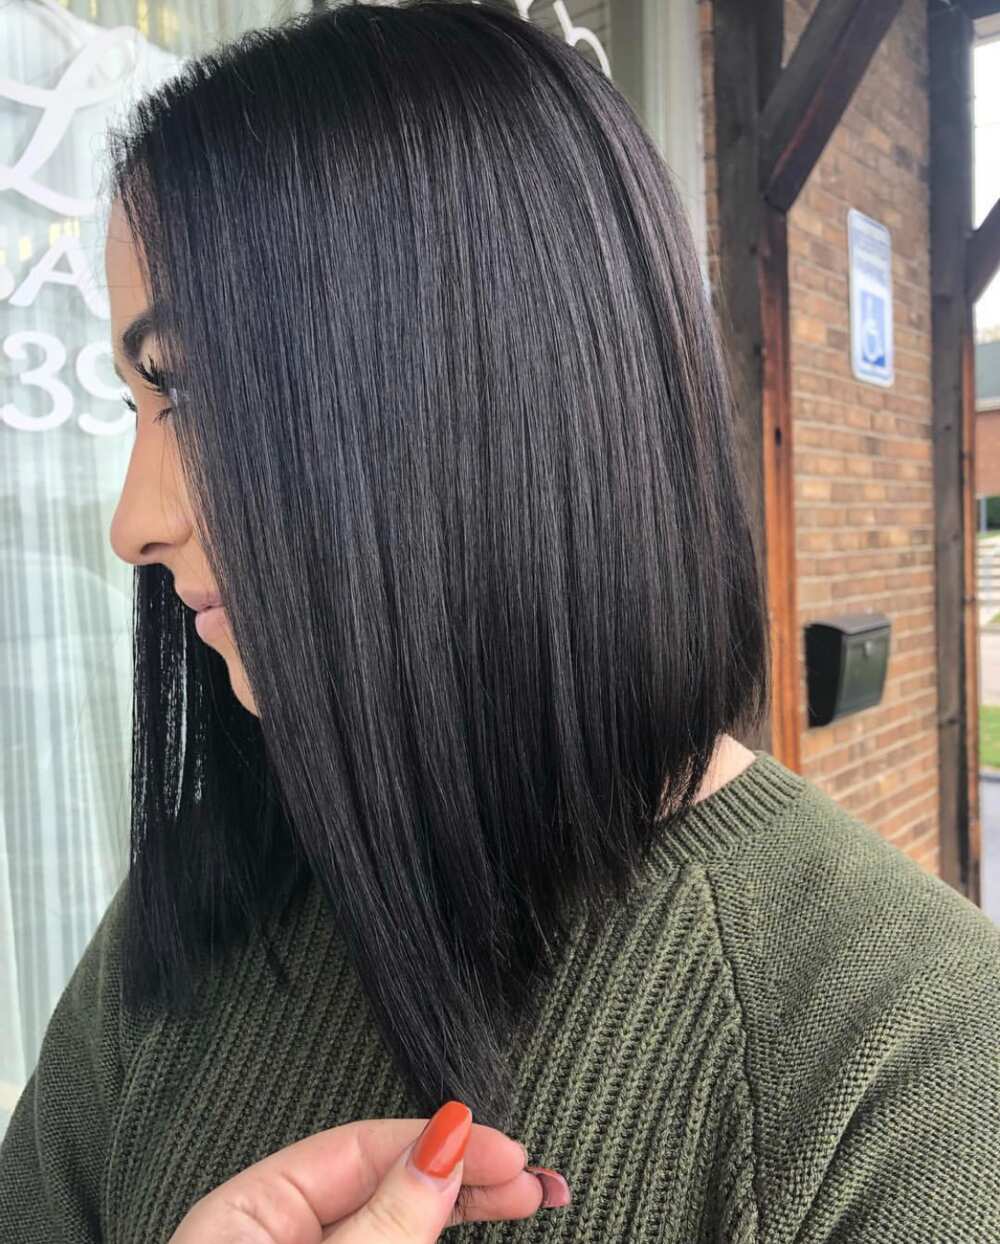 Inverted bob hairstyles 2019